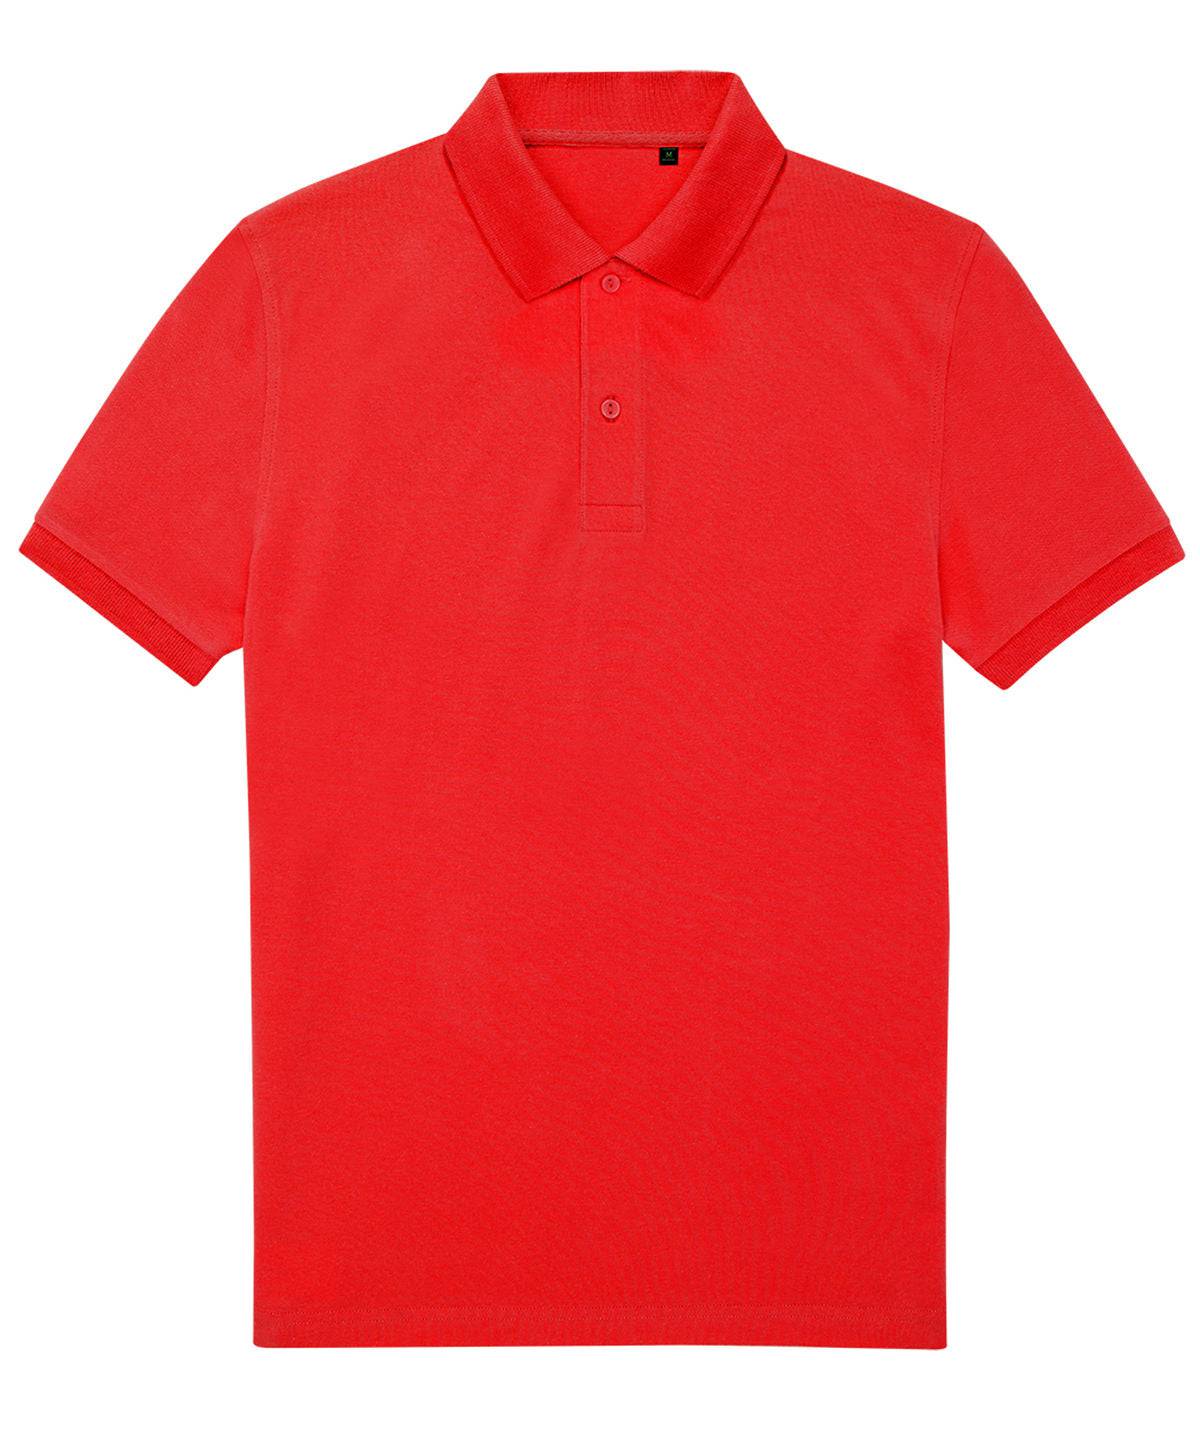 Red - B&C My Eco Polo 65/35